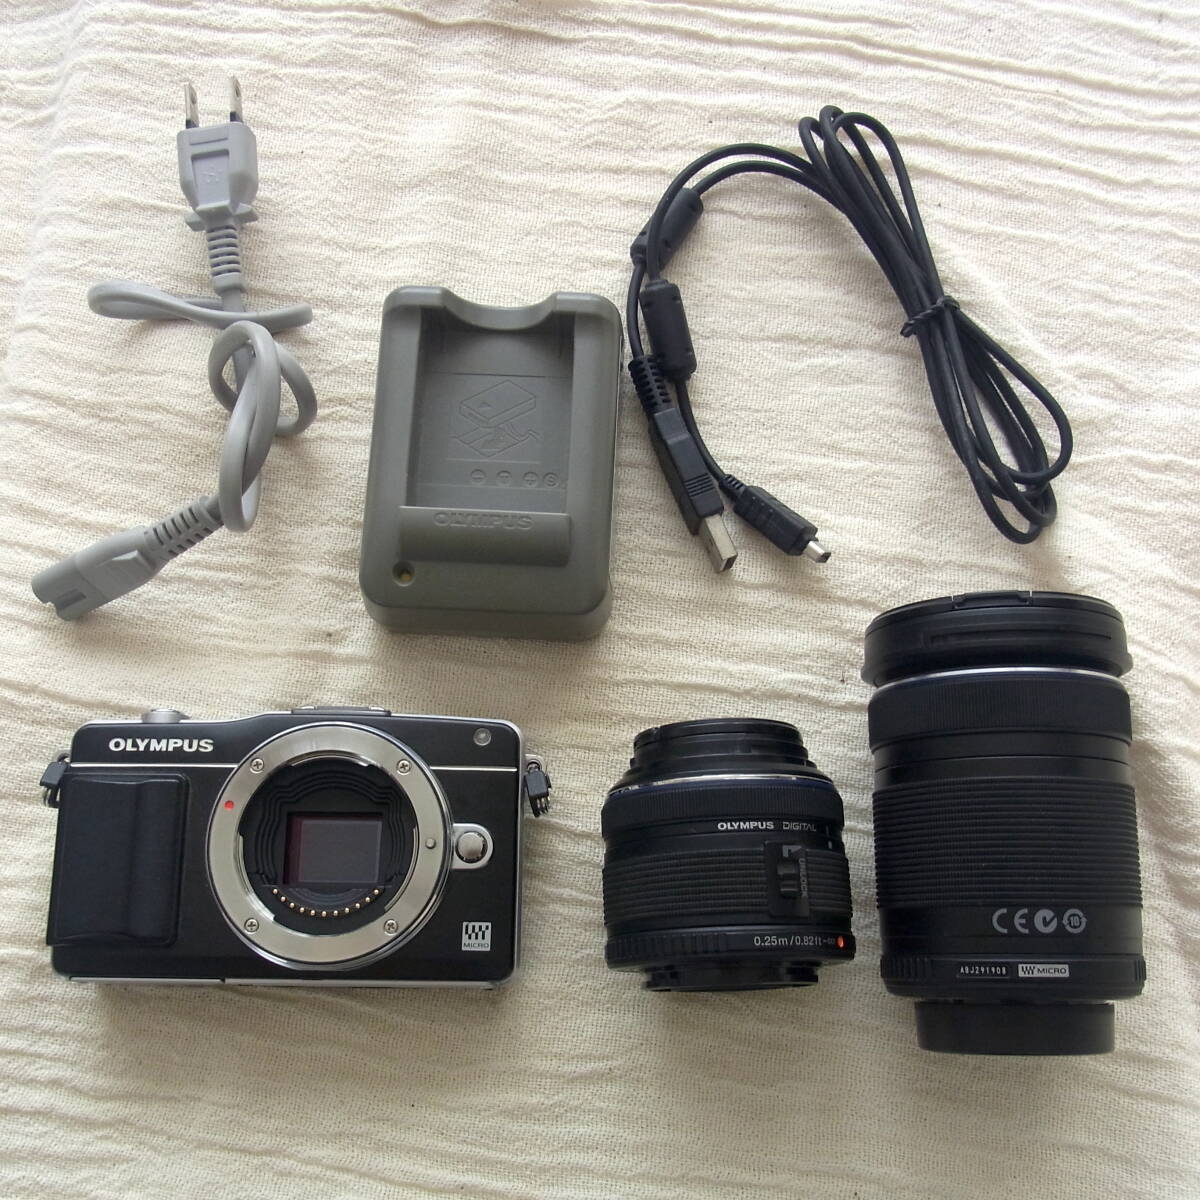  mirrorless single-lens [OLYMPUS PEN Mini]E-PM2| lens 2 piece |SD4GB| battery | charger |AV cable |HDMI| digital camera digital camera photograph photographing 